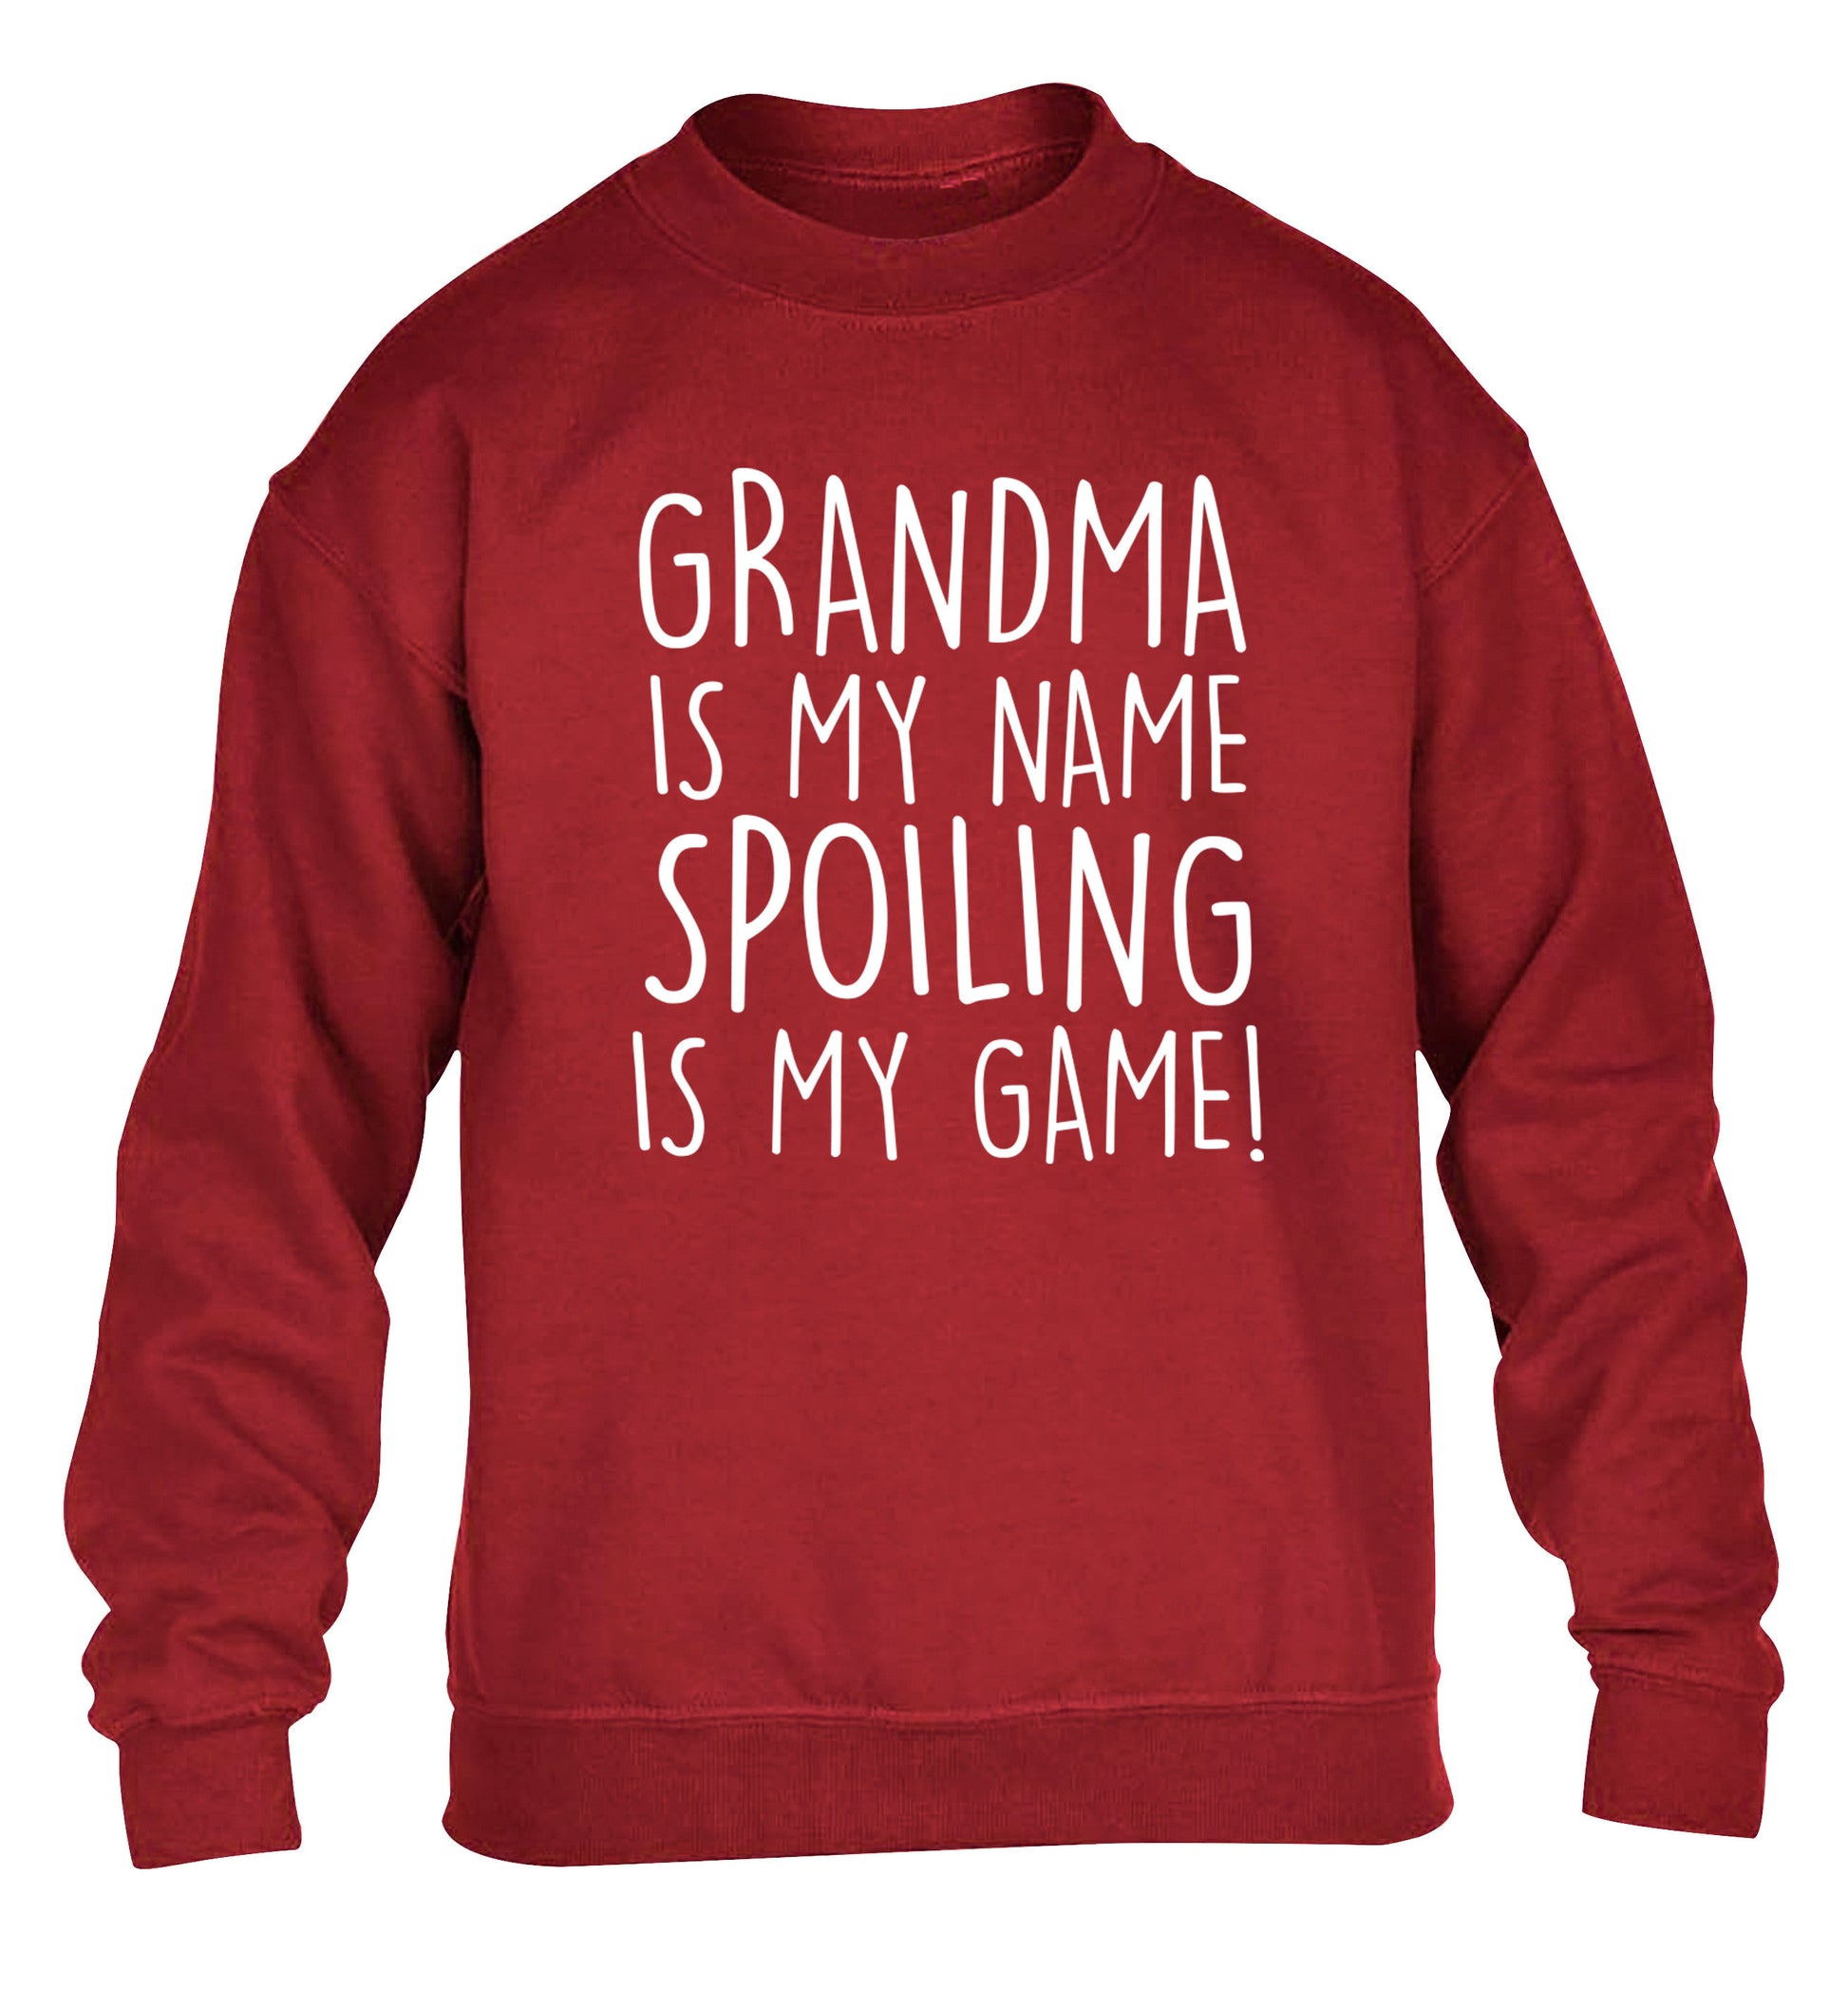 Grandma is my name, spoiling is my game children's grey sweater 12-14 Years